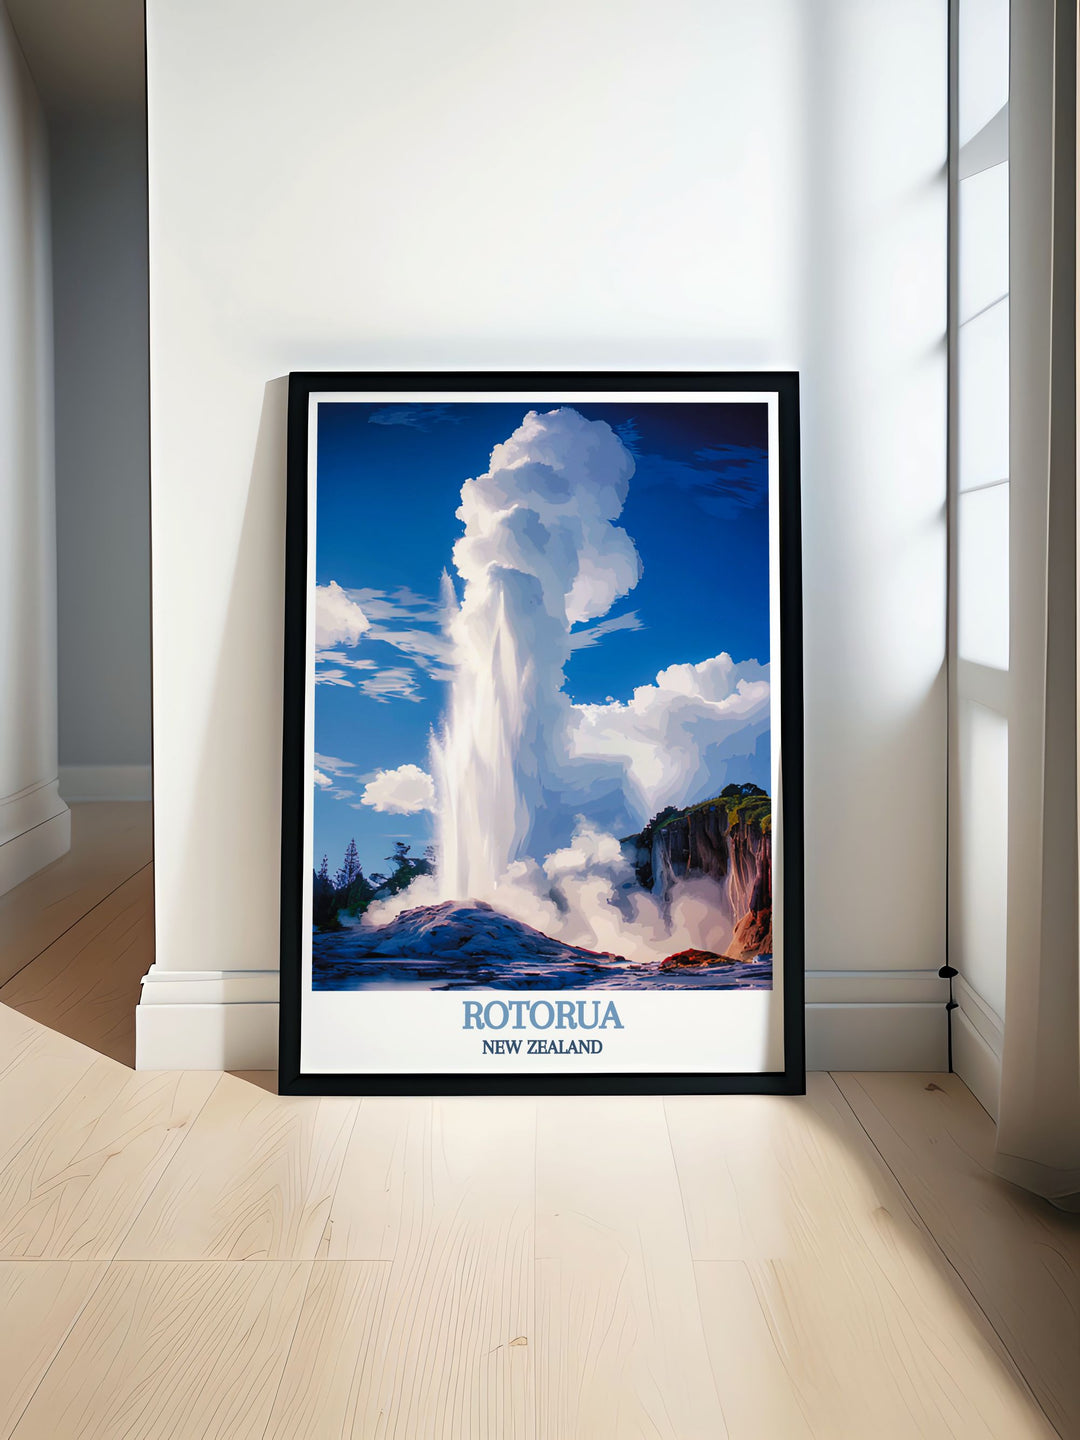 A stunning Te Puia travel poster featuring the vibrant geothermal landscapes and rich Maori culture of Rotorua New Zealand. Perfect for adding a touch of natural beauty and cultural significance to your home decor and ideal for those who appreciate Te Puia.